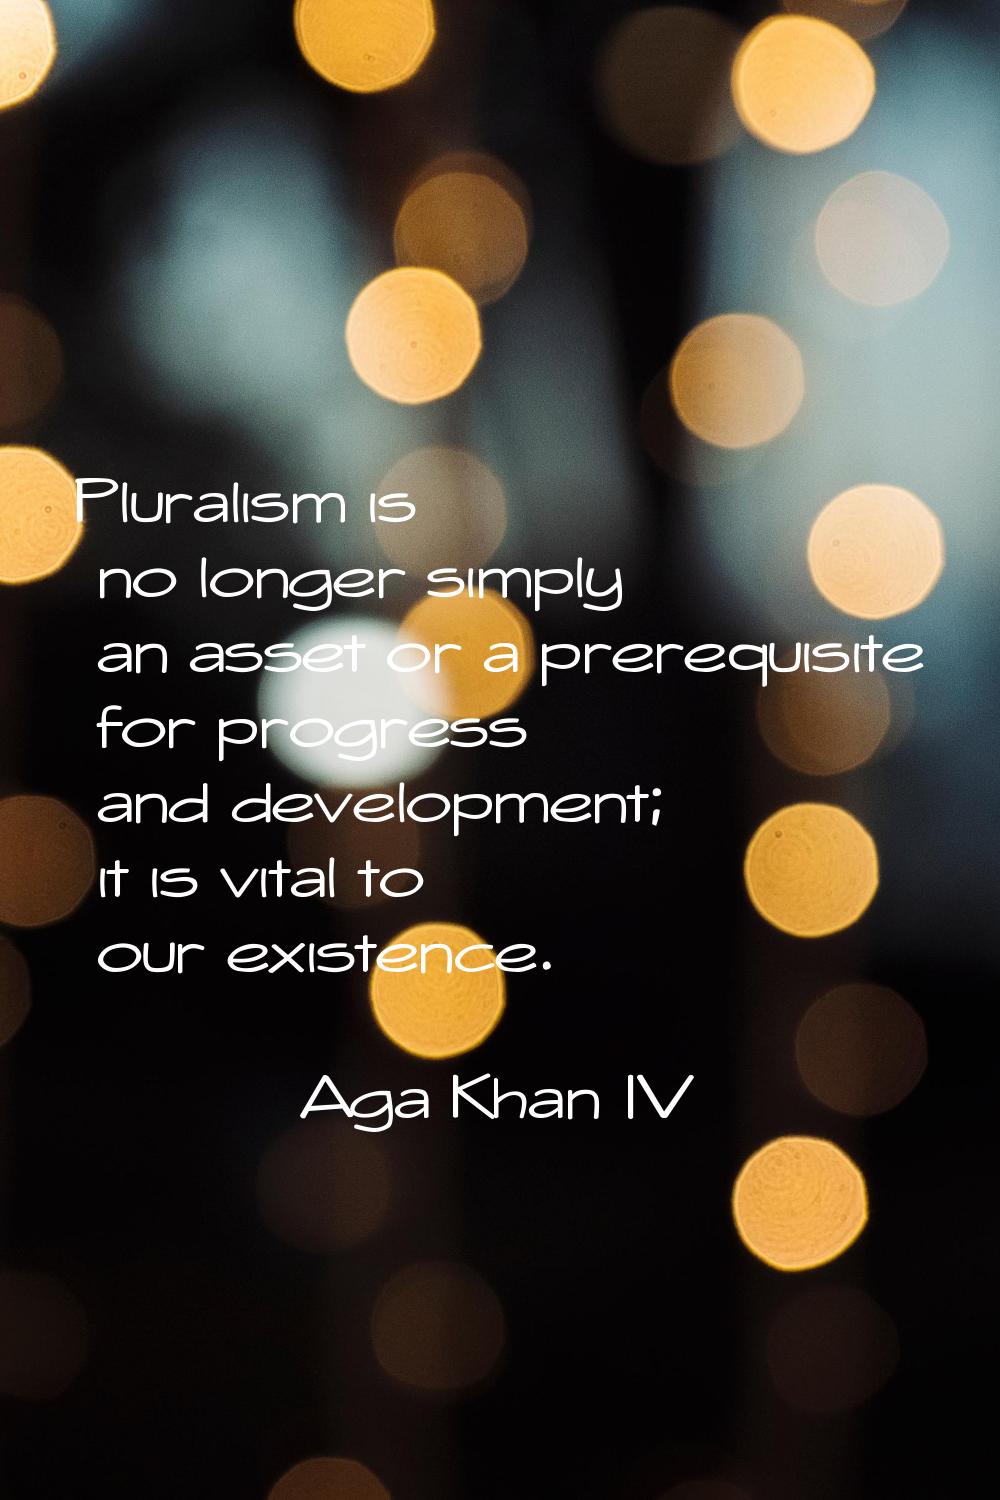 Pluralism is no longer simply an asset or a prerequisite for progress and development; it is vital 